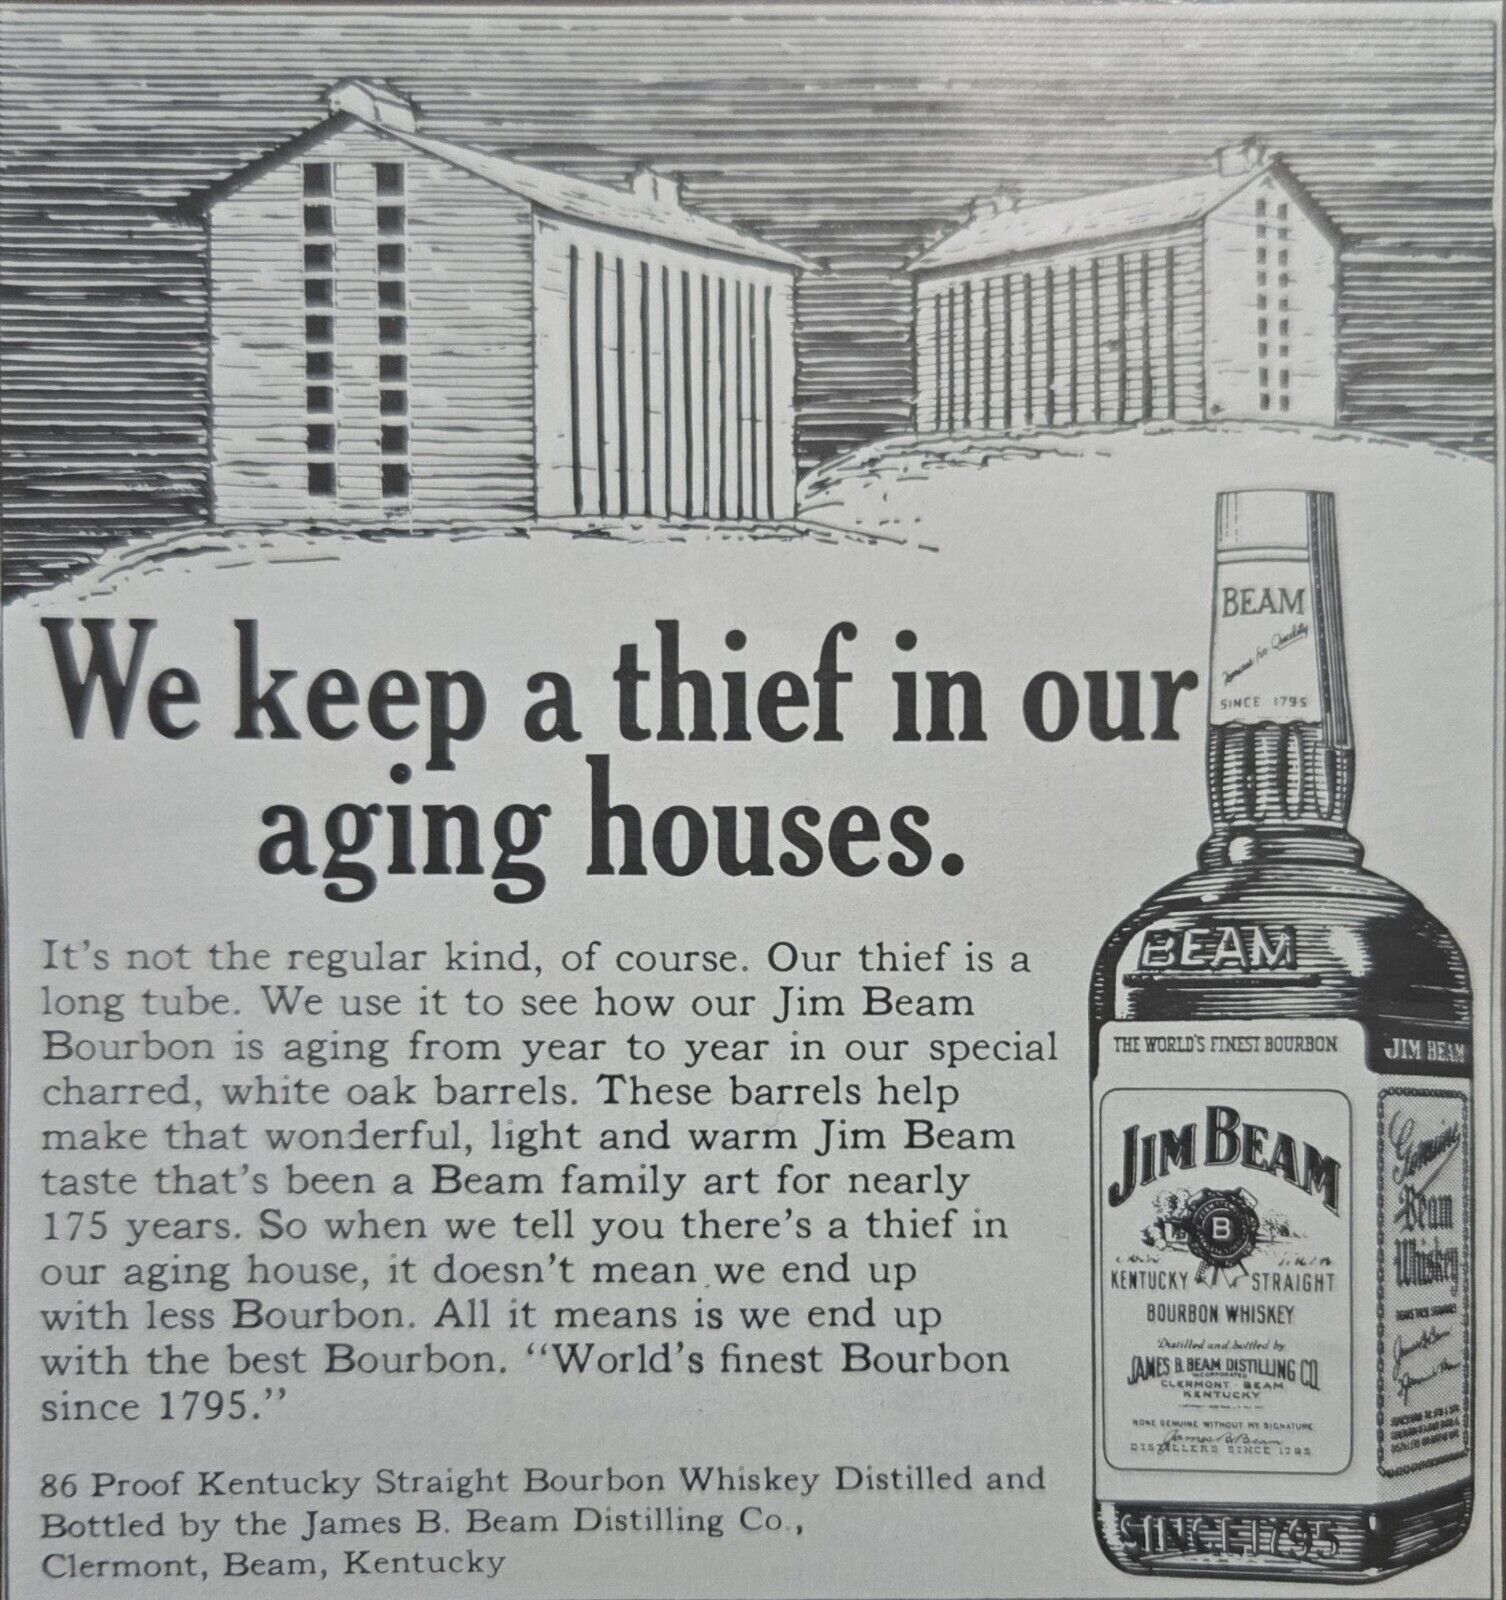 1969 Jim Beam Bourbon Ad - A Thief in Our Aging Houses